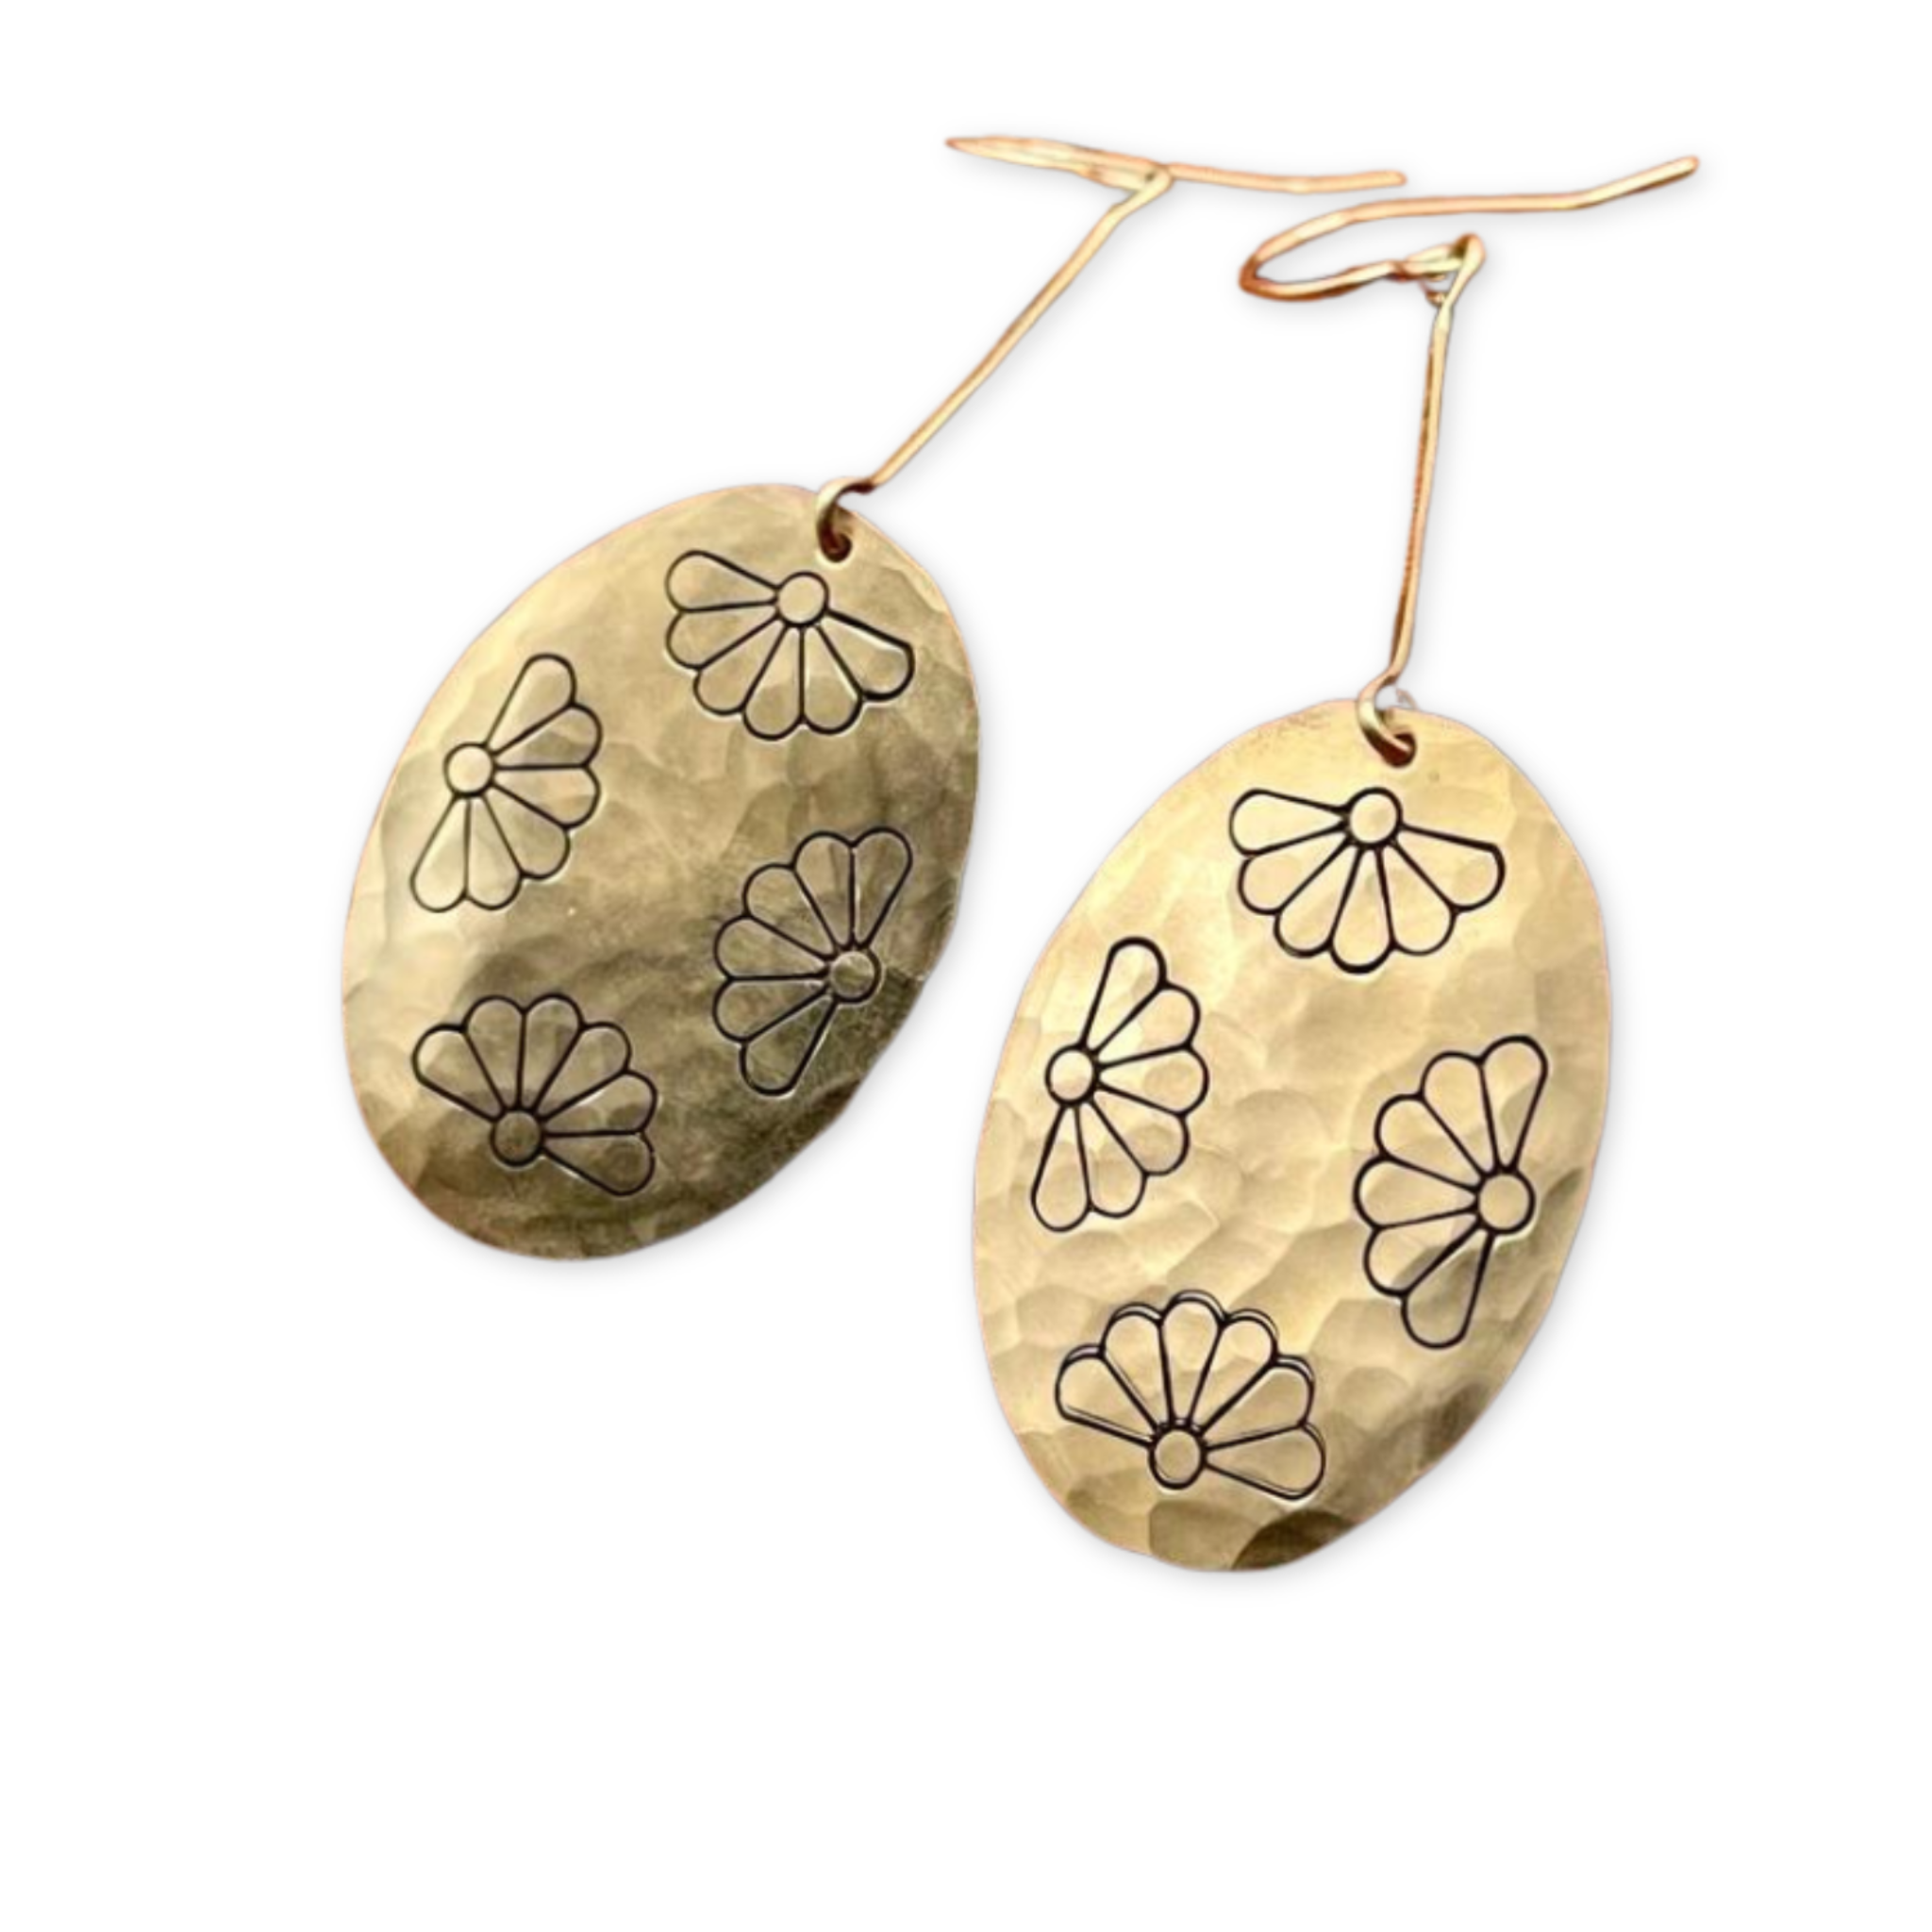 large hammered oval earrings stamped with floral designs